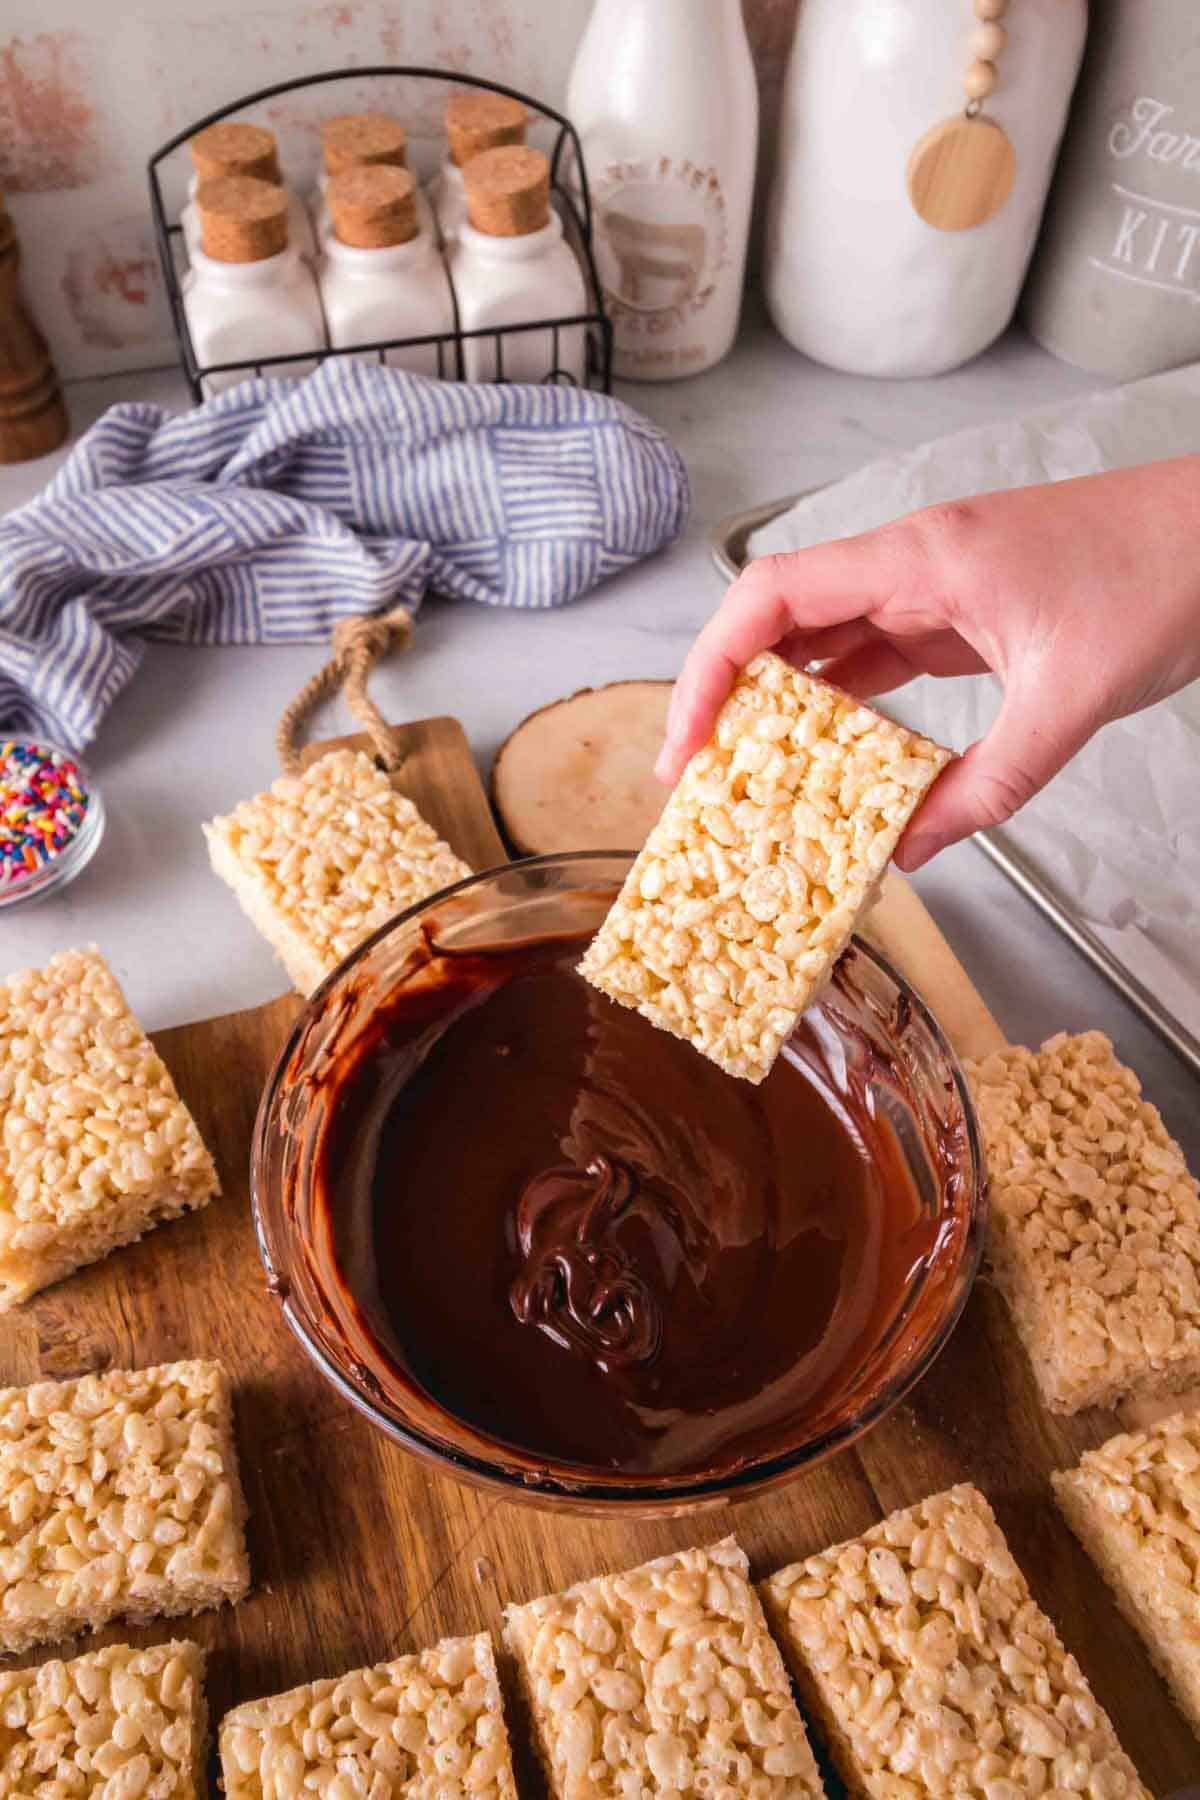 Rice krispie treats being dipped in a bowl of chocolate.